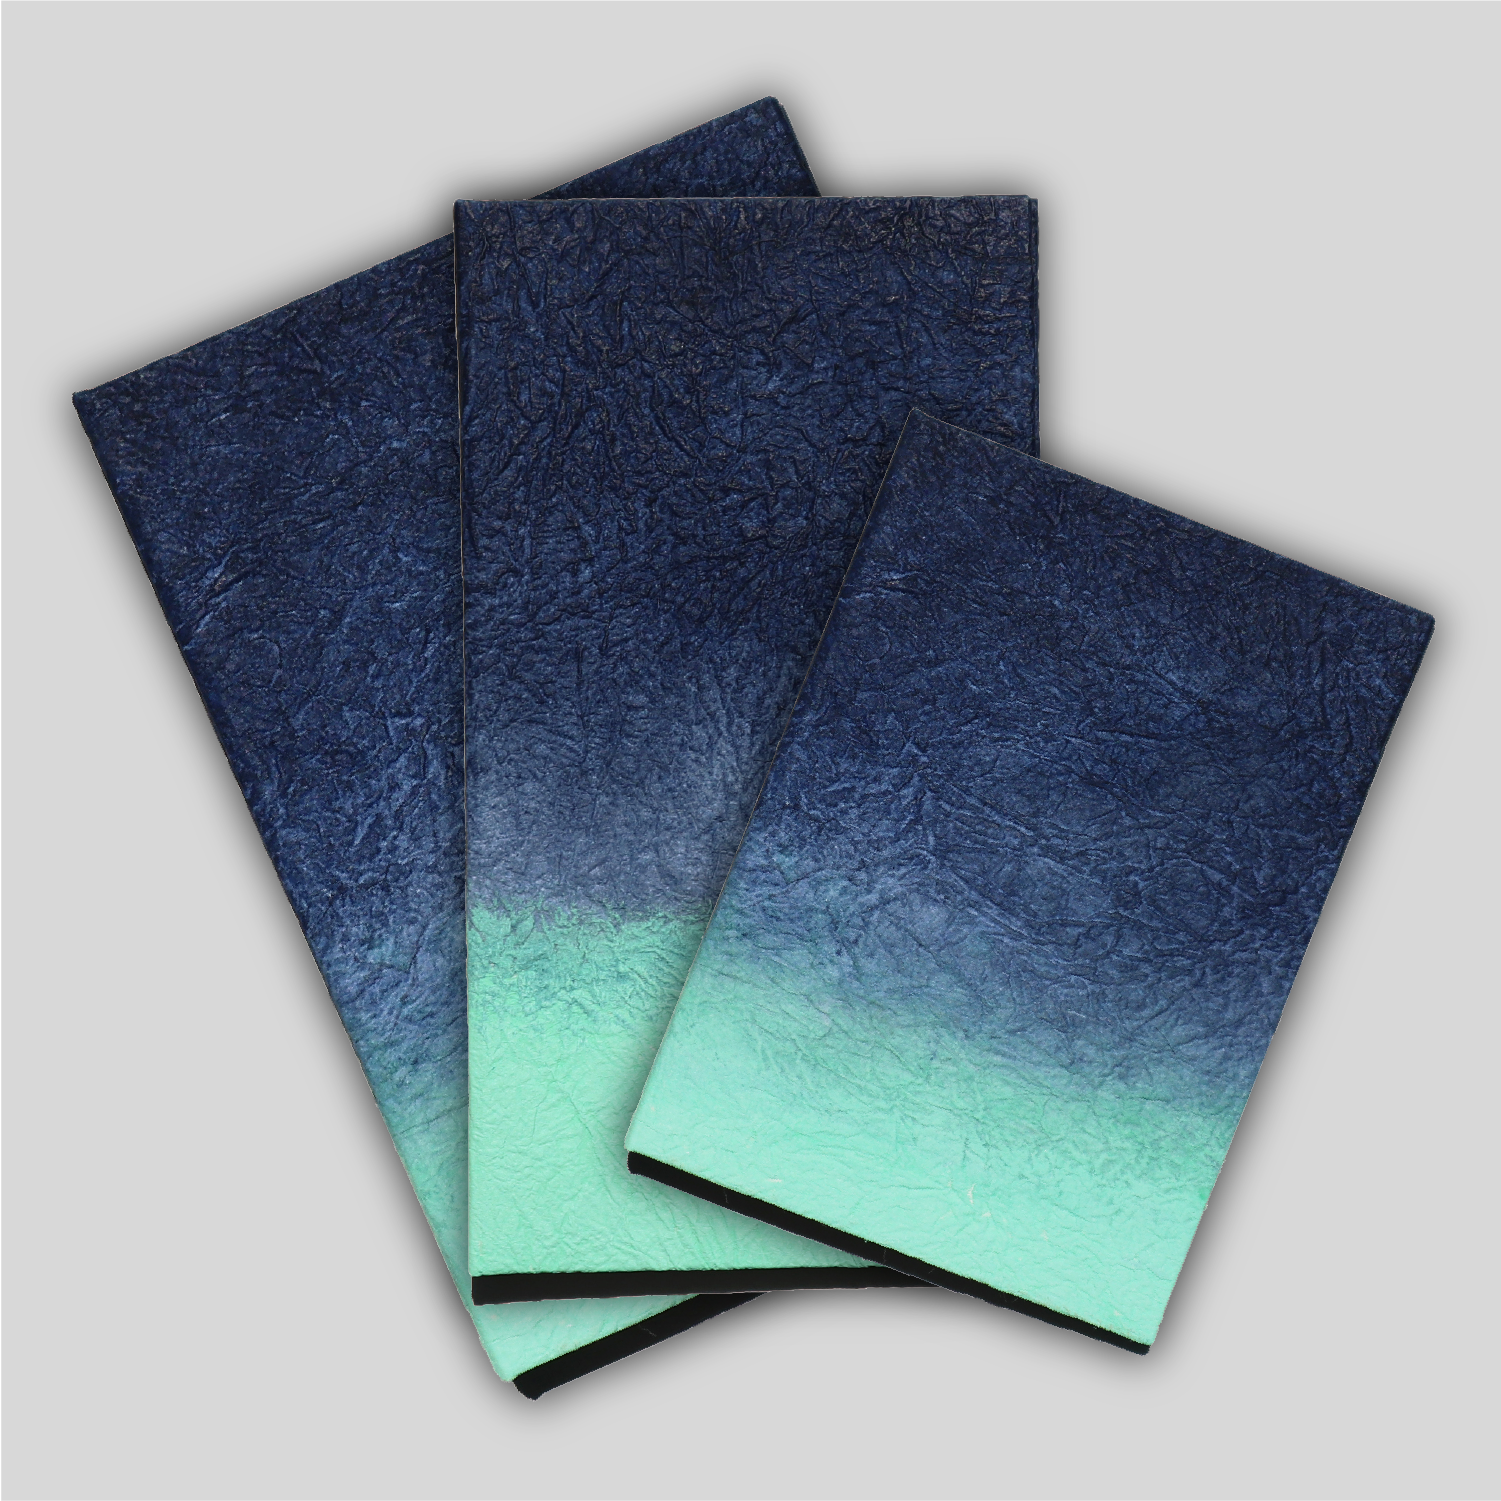 Fanned array of Gugimfolios in A5, Travel, and A6 in Navy/Mint